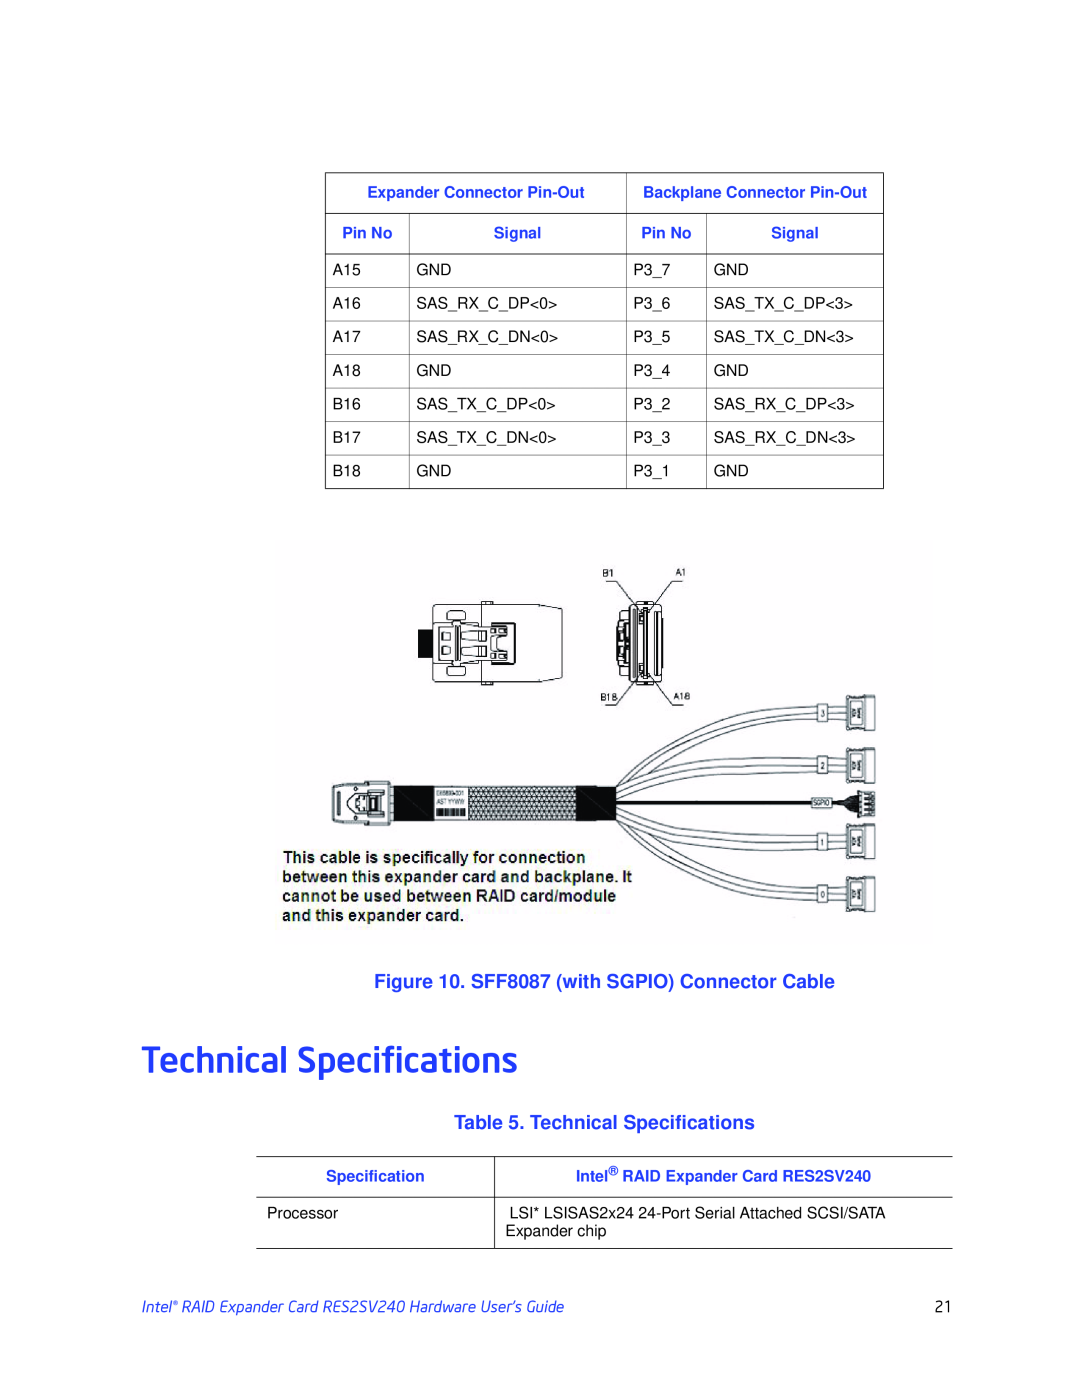 Intel RES2SV240 Technical Specifications, SFF8087 with SGPIO Connector Cable, Expander Connector Pin-Out, Pin No, Signal 